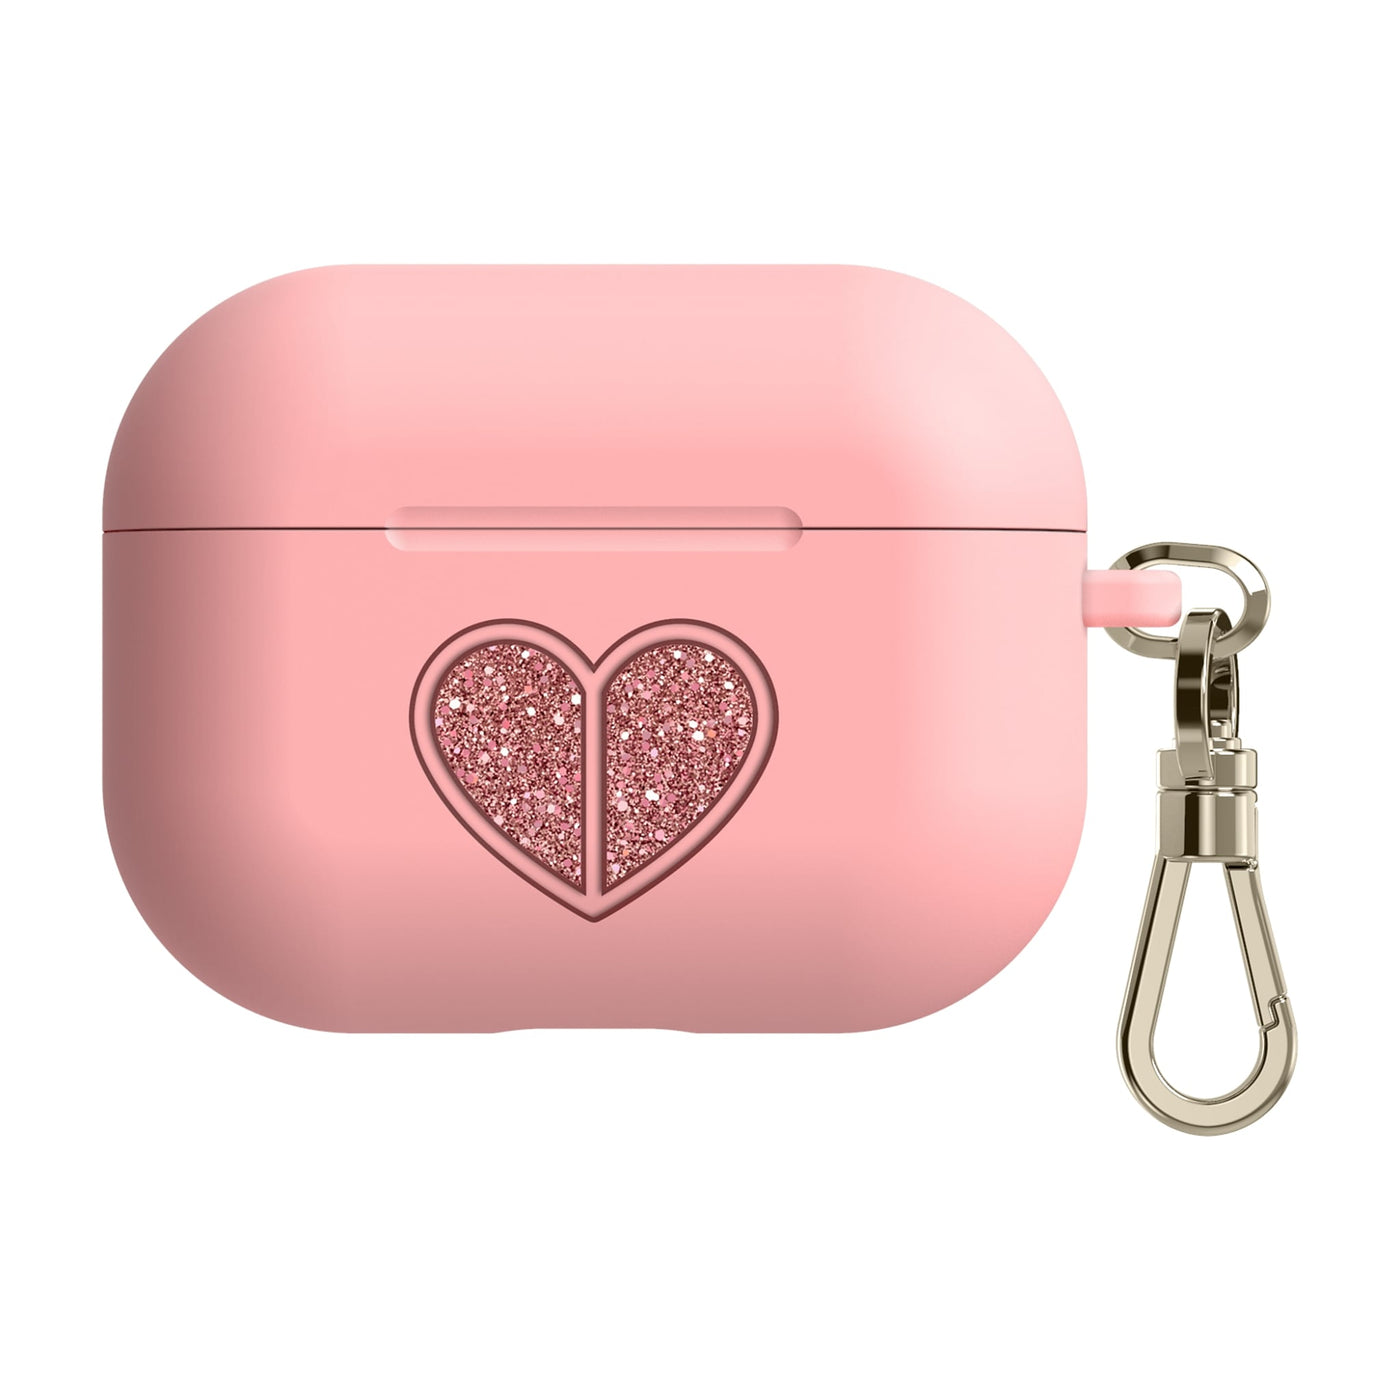 kate spade new york  (ケイト・スペード・ニューヨーク) - Silicone AirPods Pro Case for AirPods Pro - Rococo Pink